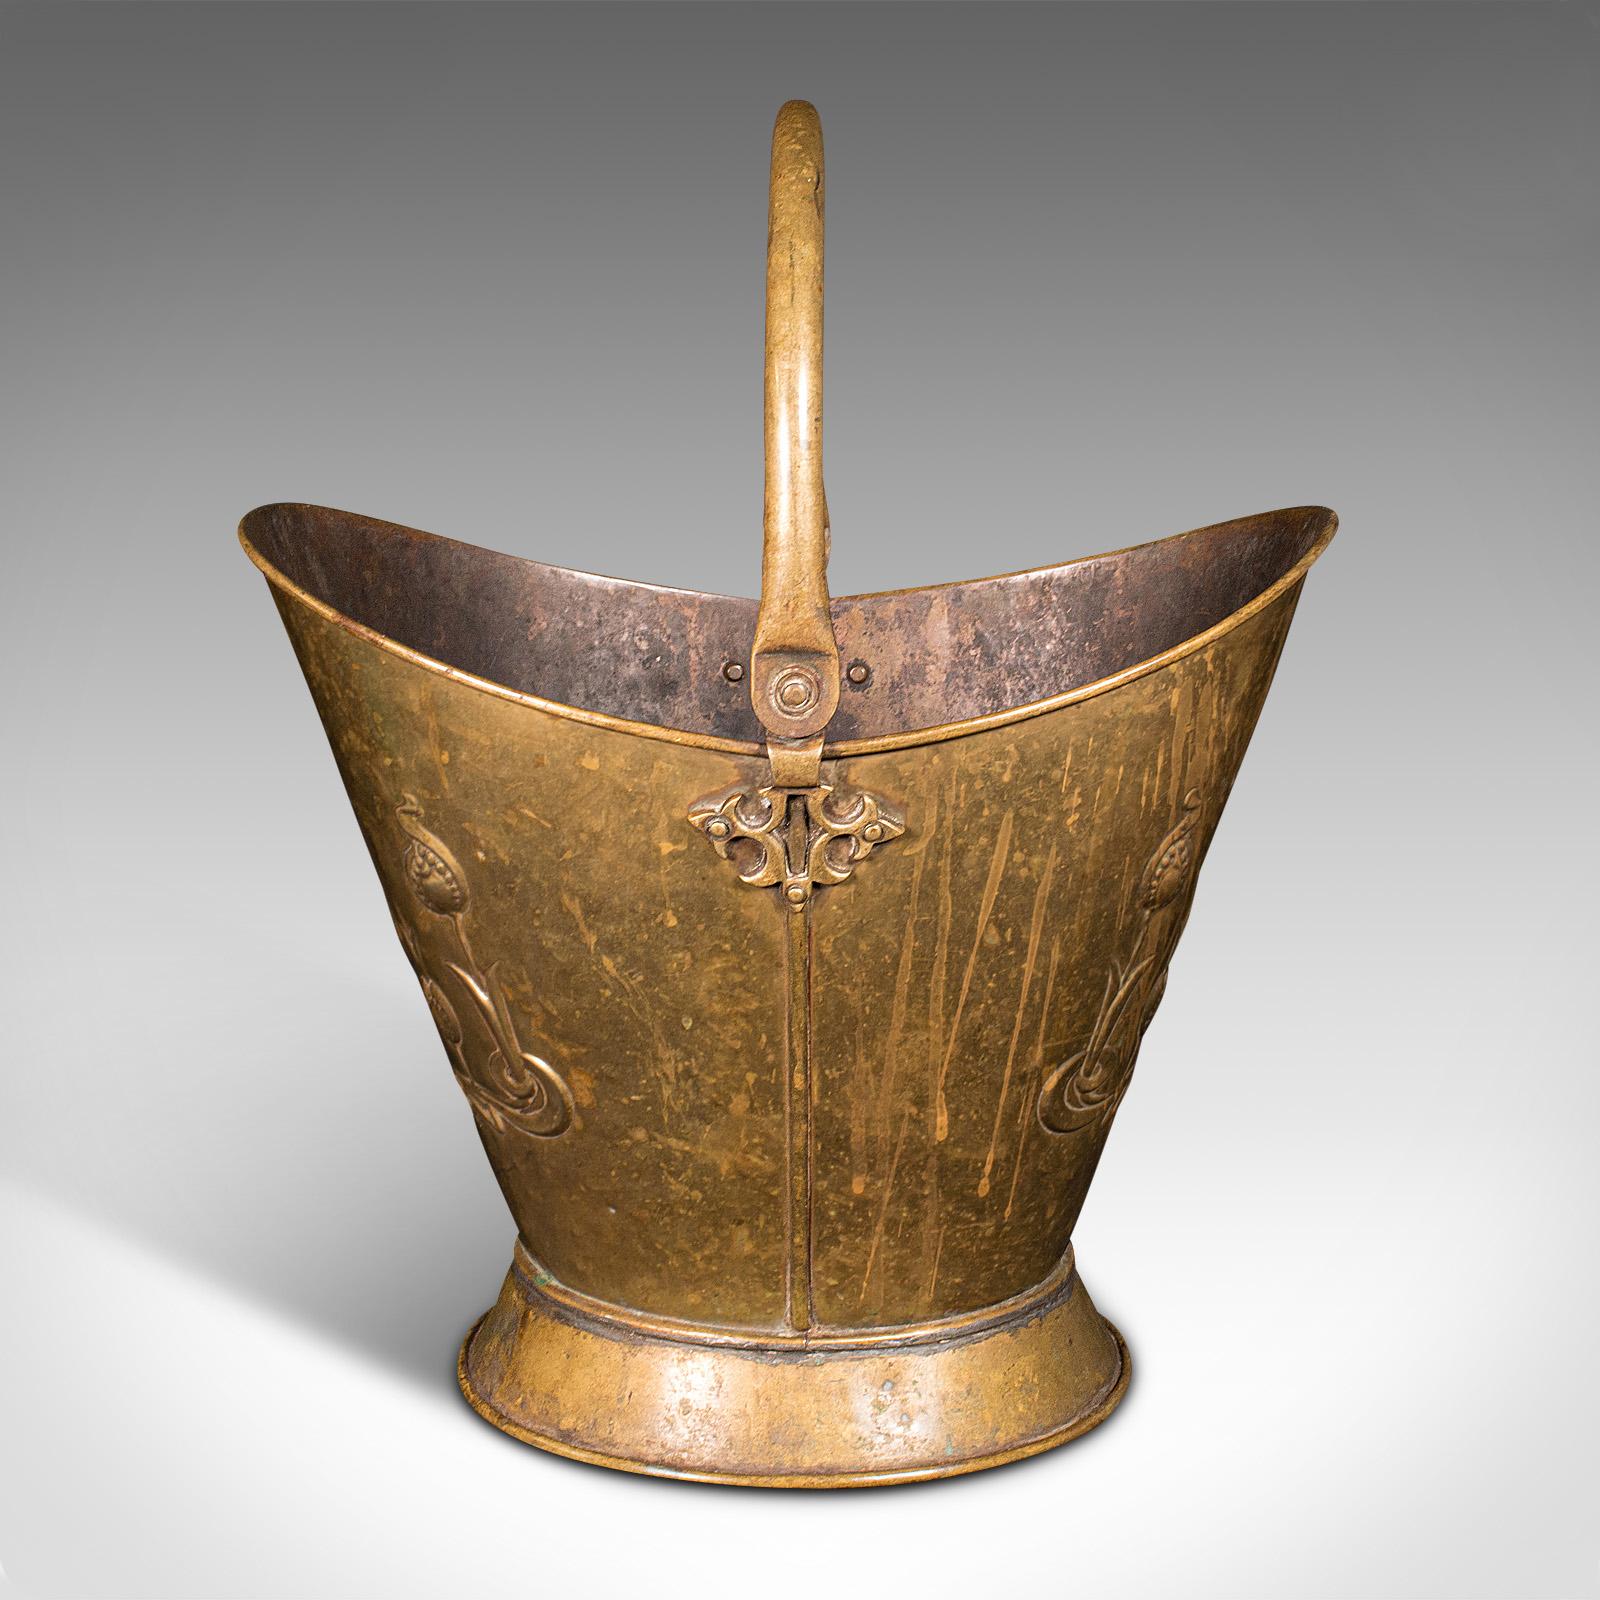 This is an antique Art Nouveau Fireside Bucket. An English, brass log or coal bin, dating to the late Victorian period, circa 1900.

Appealing Art Nouveau taste to accentuate the fireplace
Displays a desirable aged patina and in good original